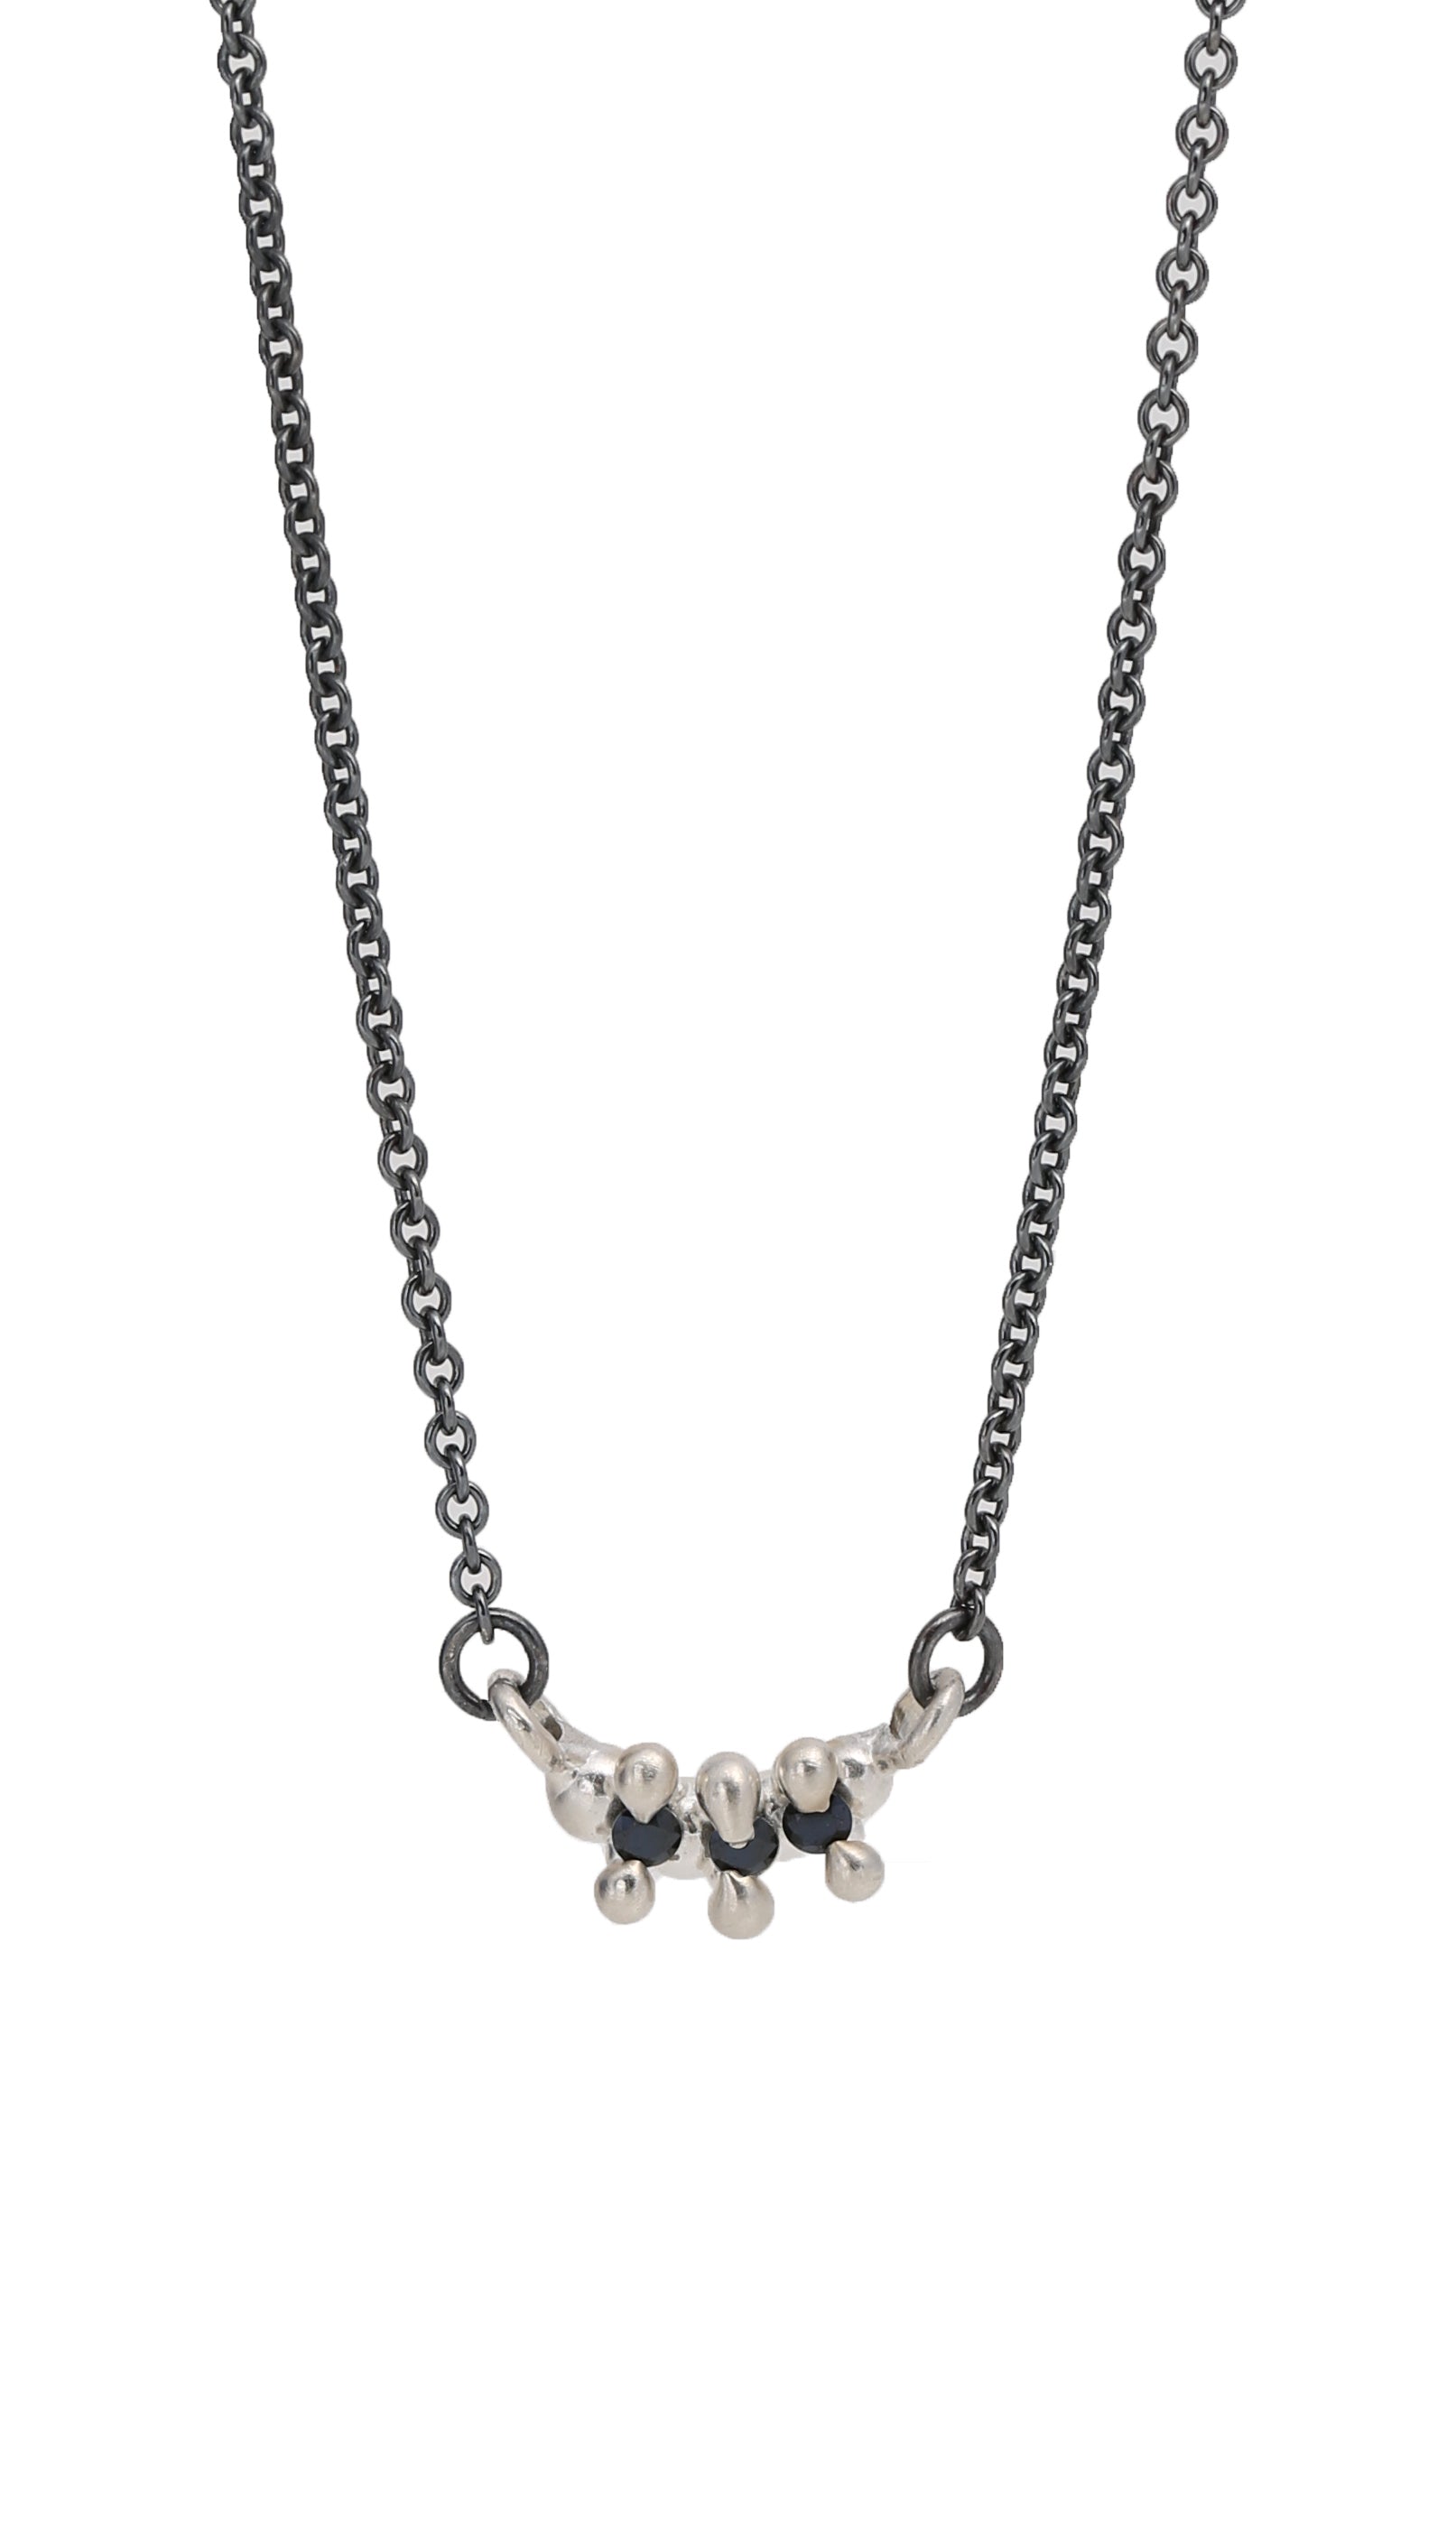 Limited Edition 3 Stone Bar Necklace Black Spinel